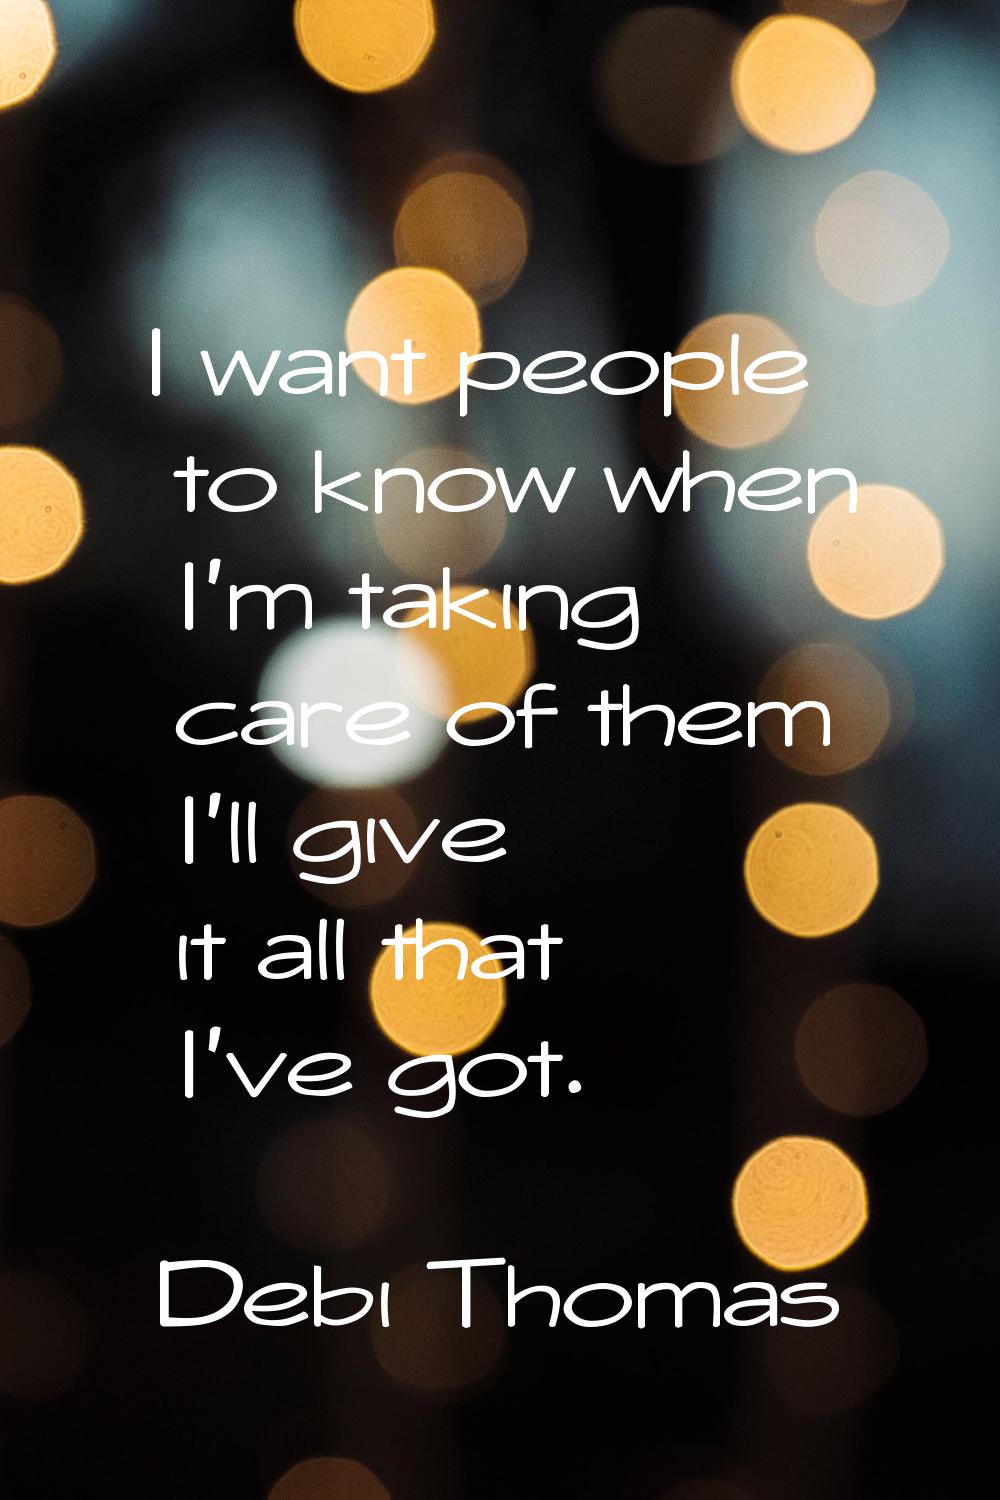 I want people to know when I'm taking care of them I'll give it all that I've got.